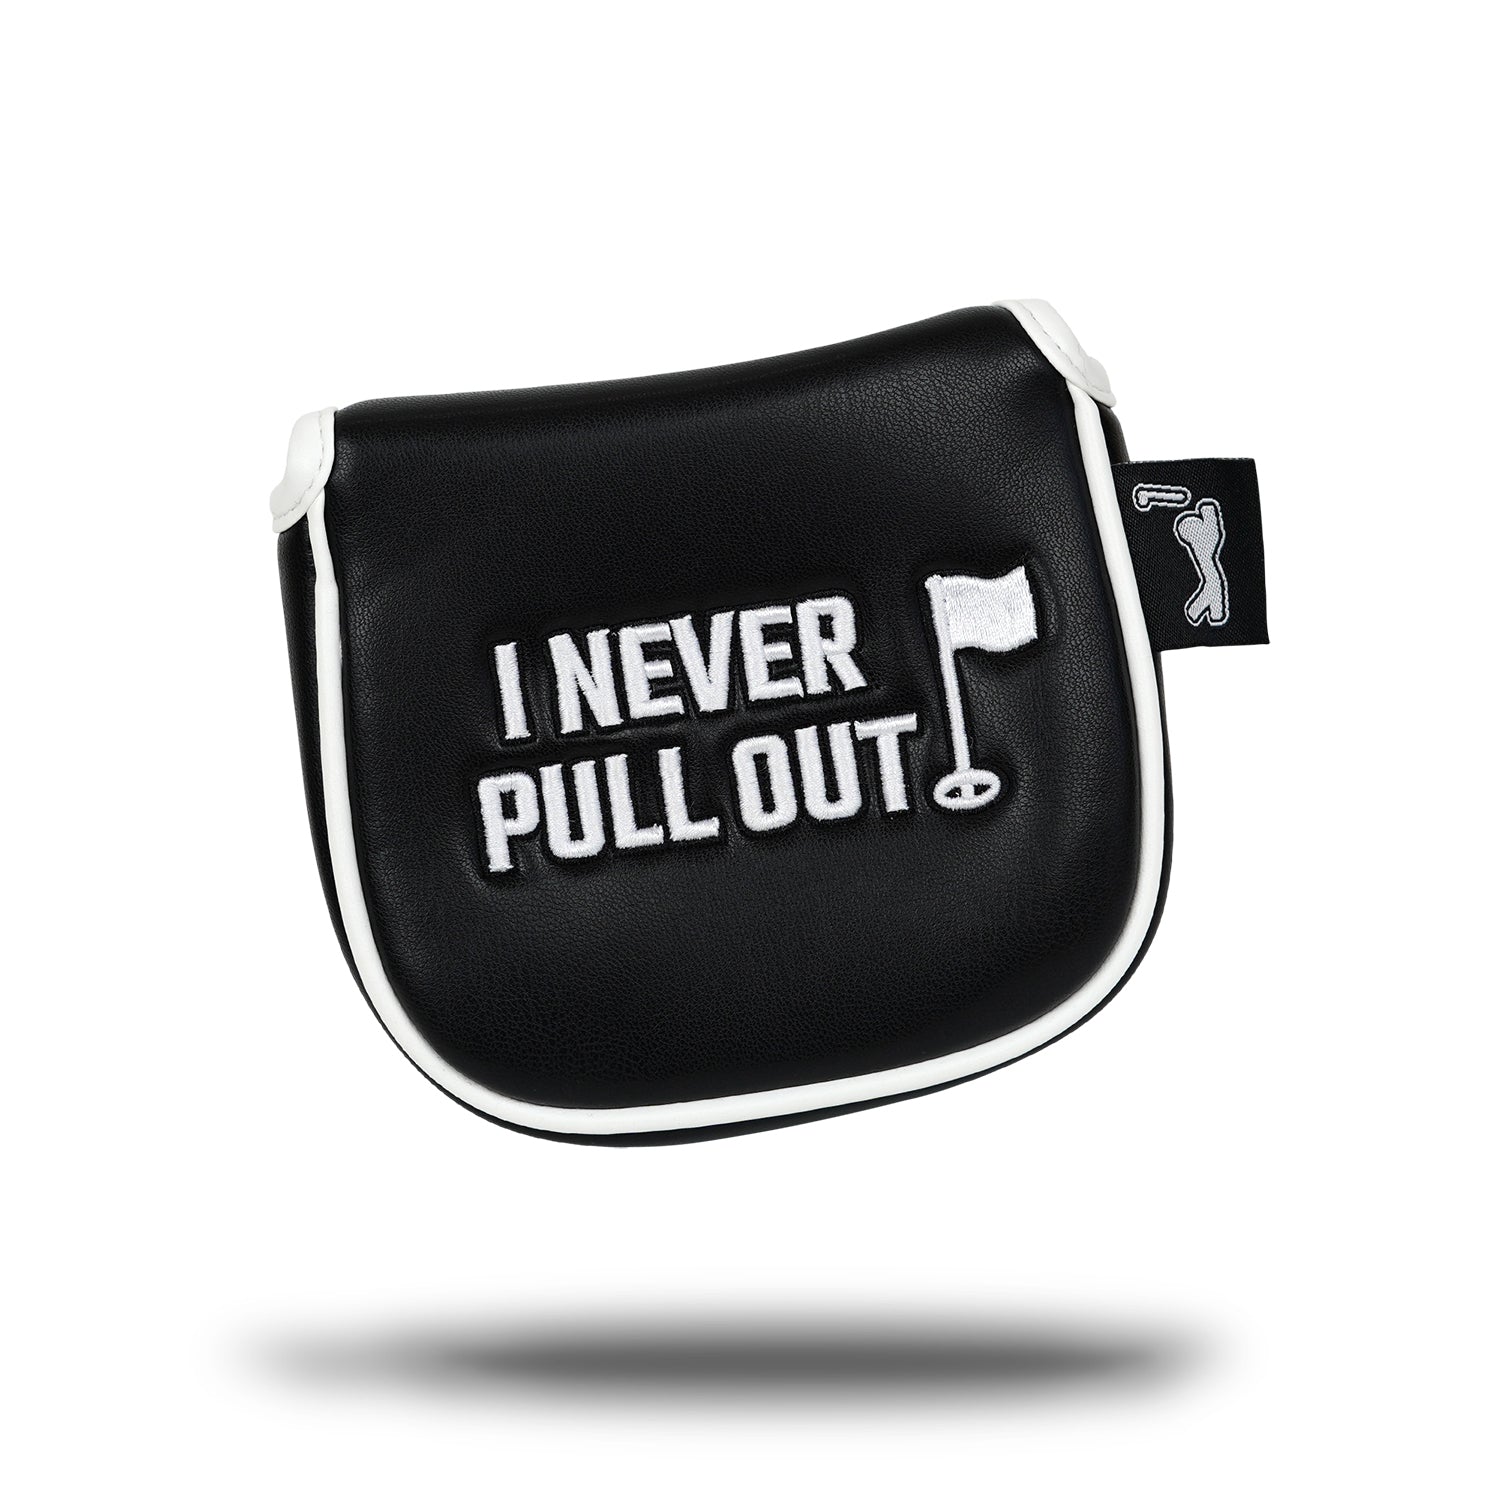 I NEVER PULL OUT - Mallet Putter Headcover